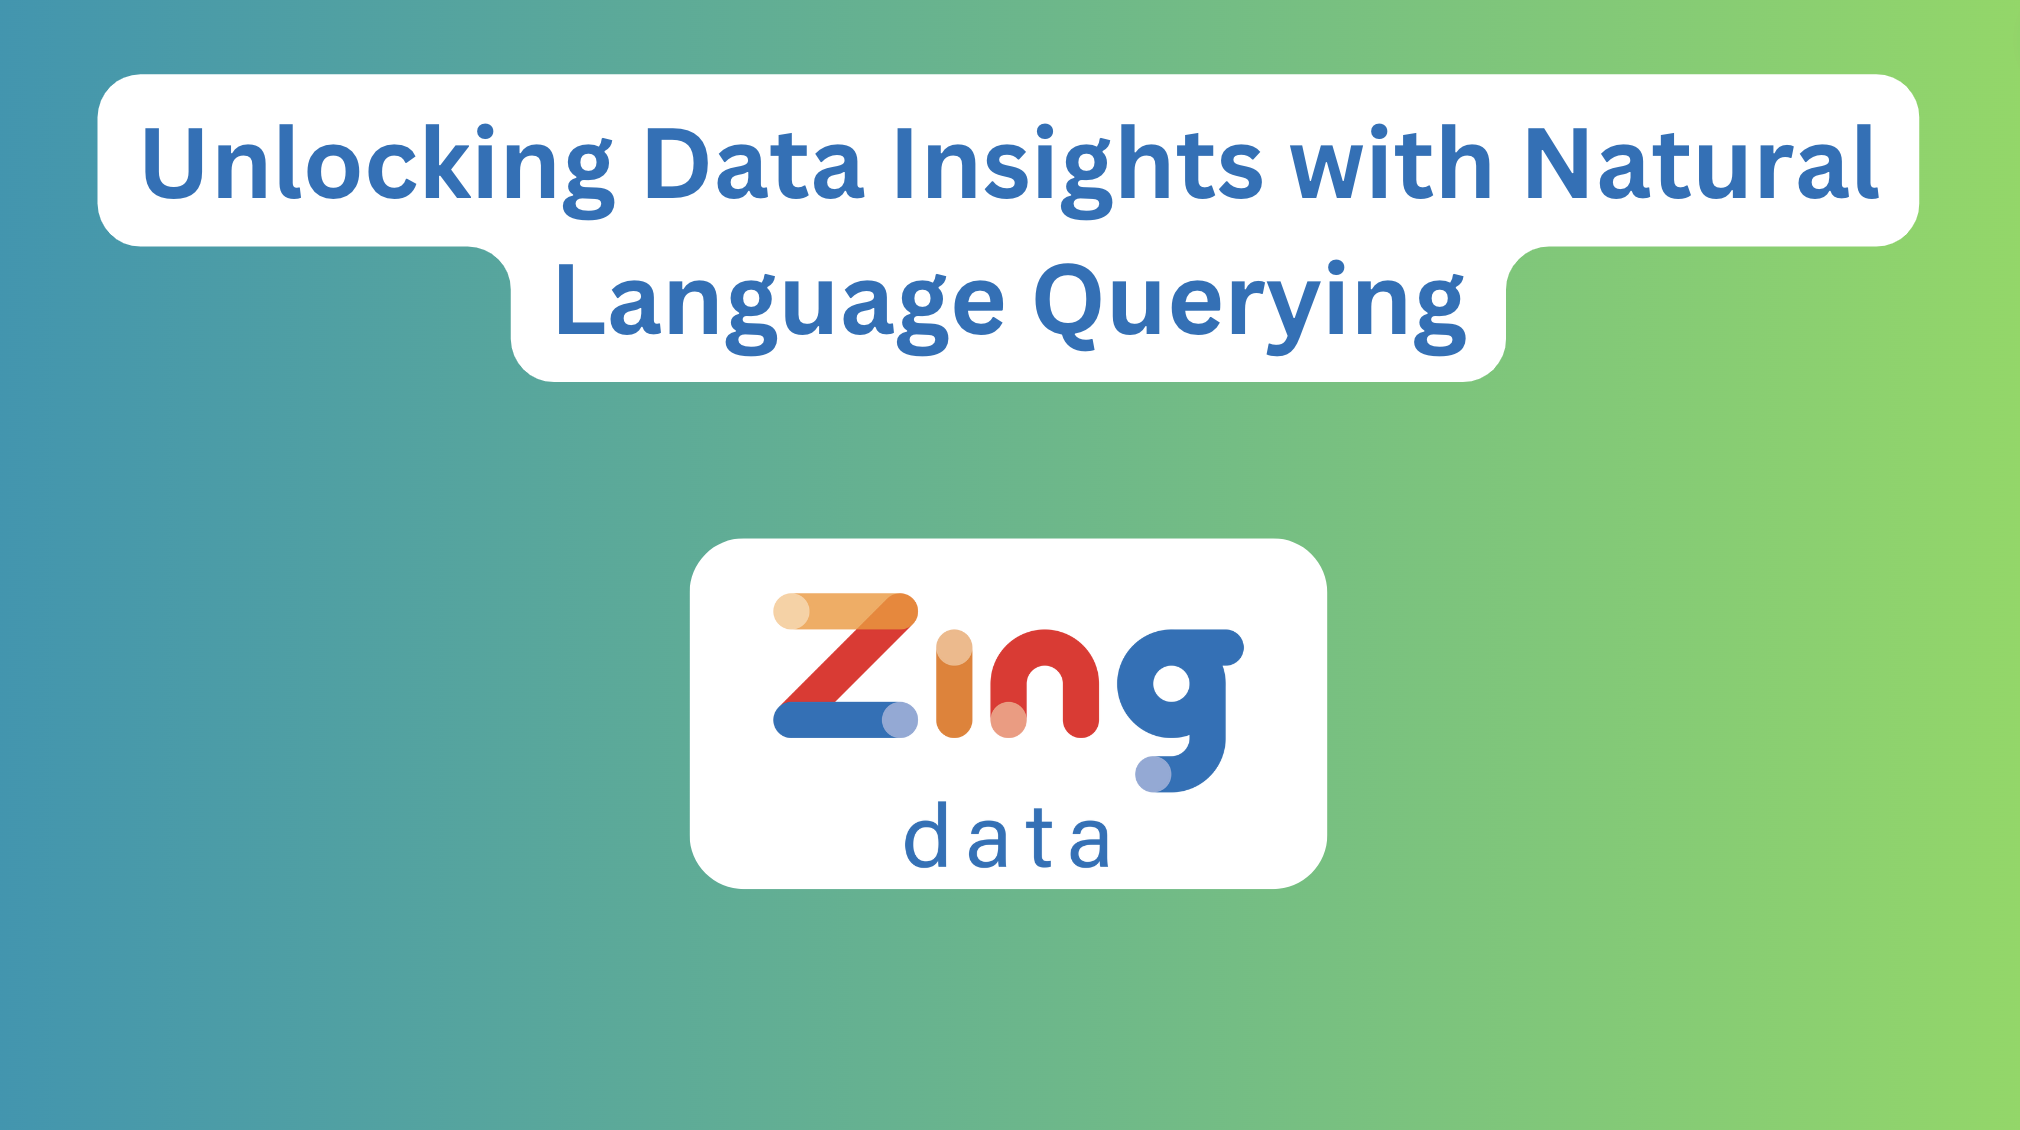 Unlocking Data Insights with Natural Language Querying